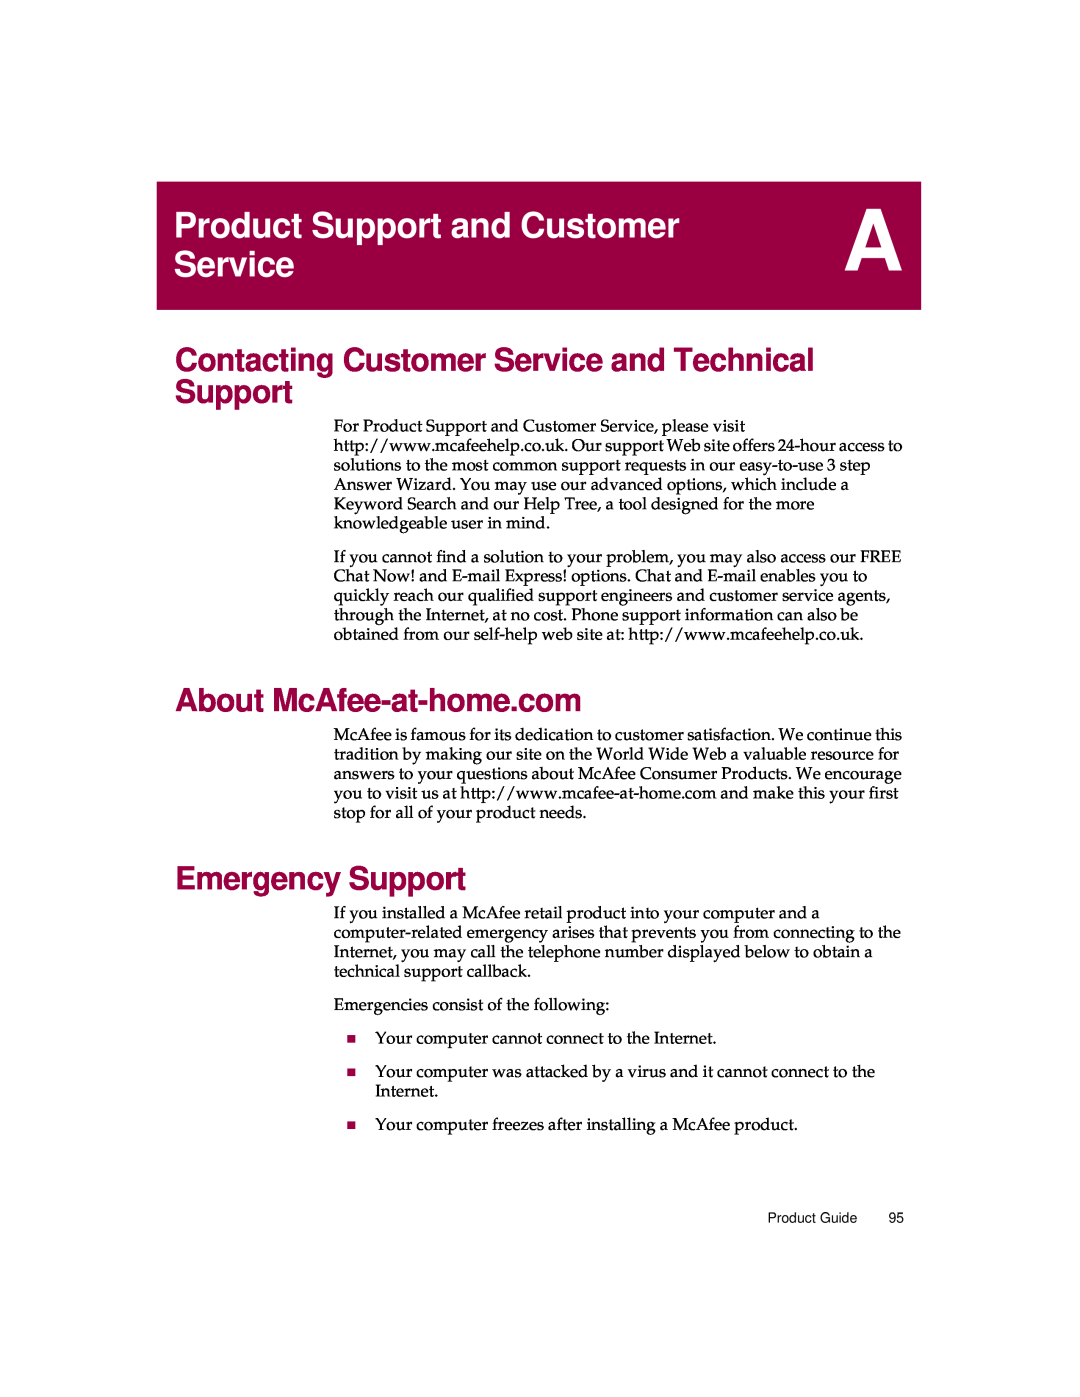 McAfee 5 manual Product Support and Customer, Contacting Customer Service and Technical Support, Emergency Support 